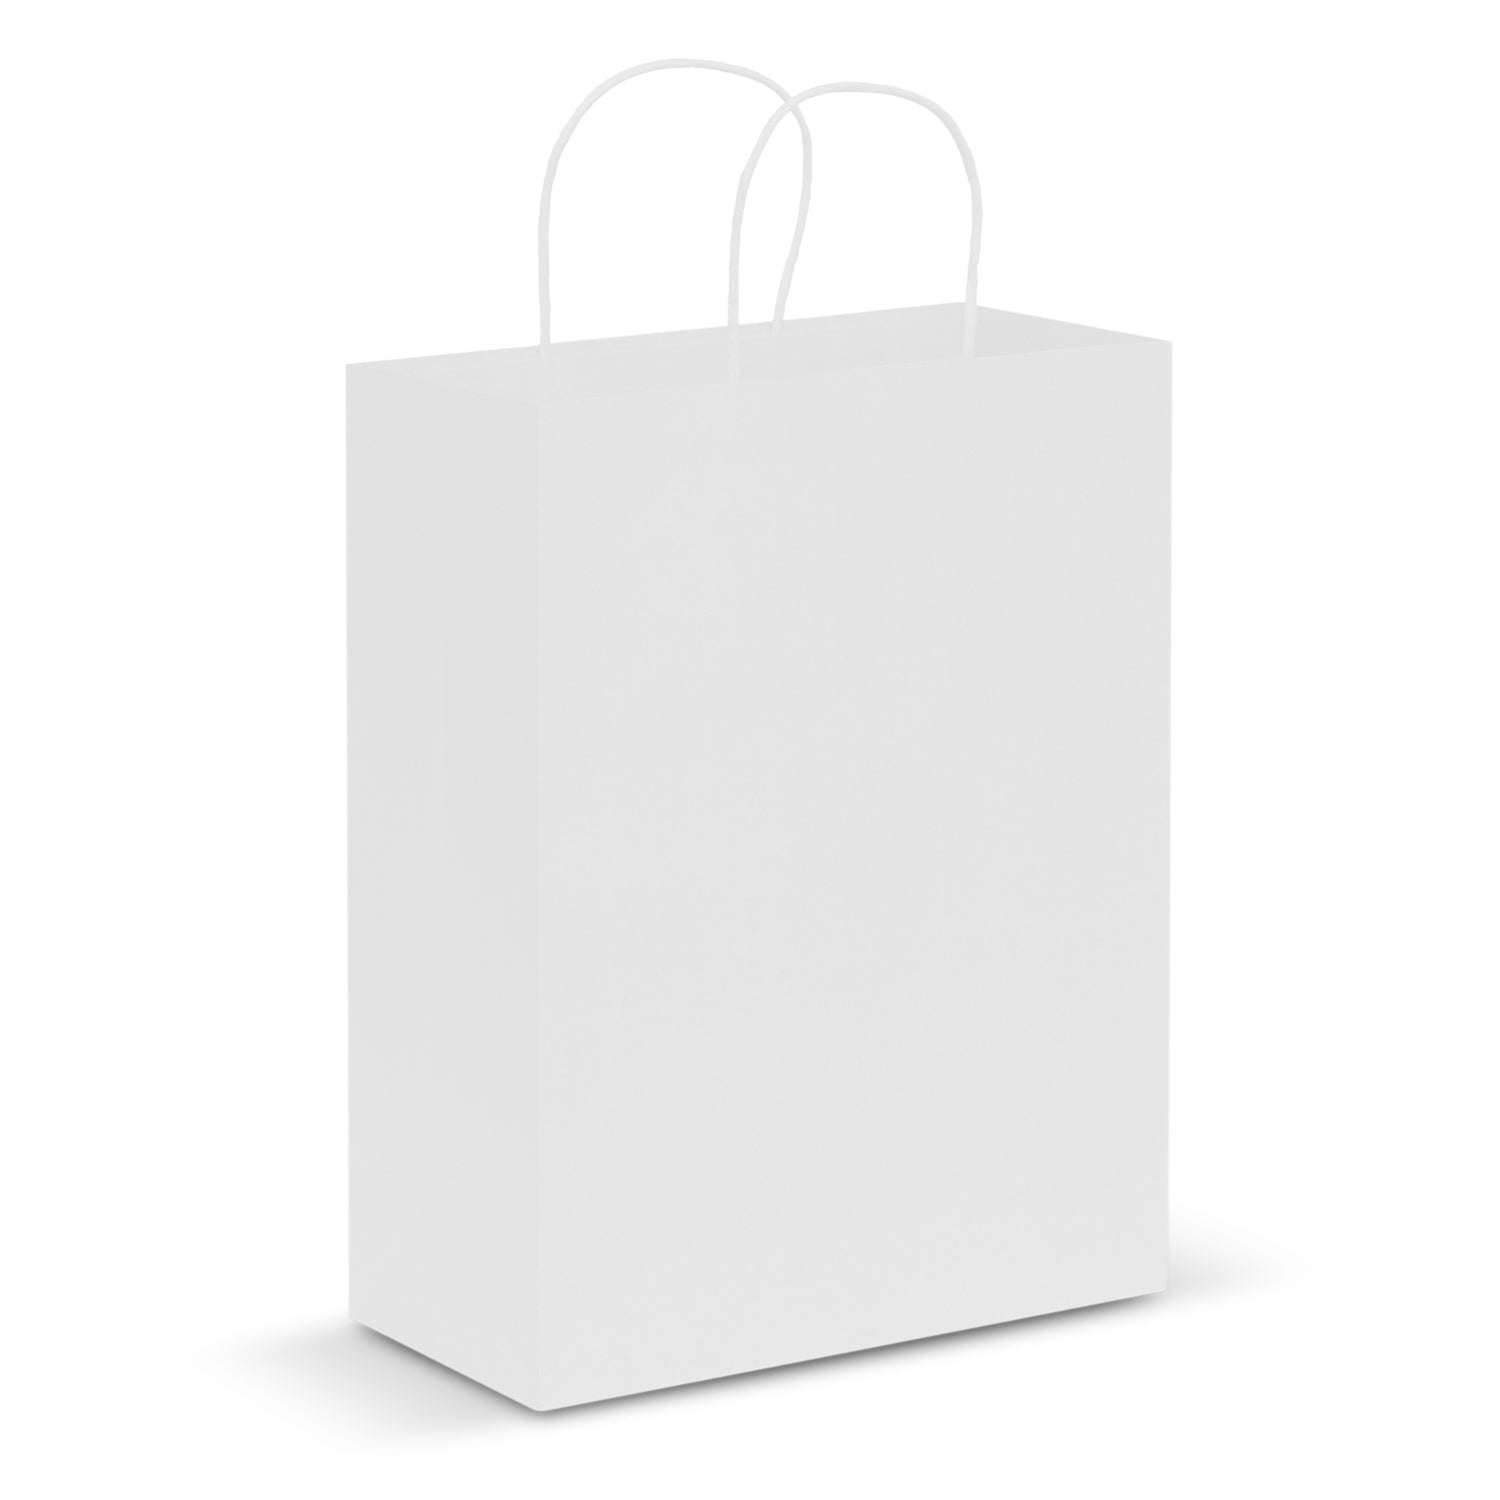 Paper Carry Bag  Large [107590]